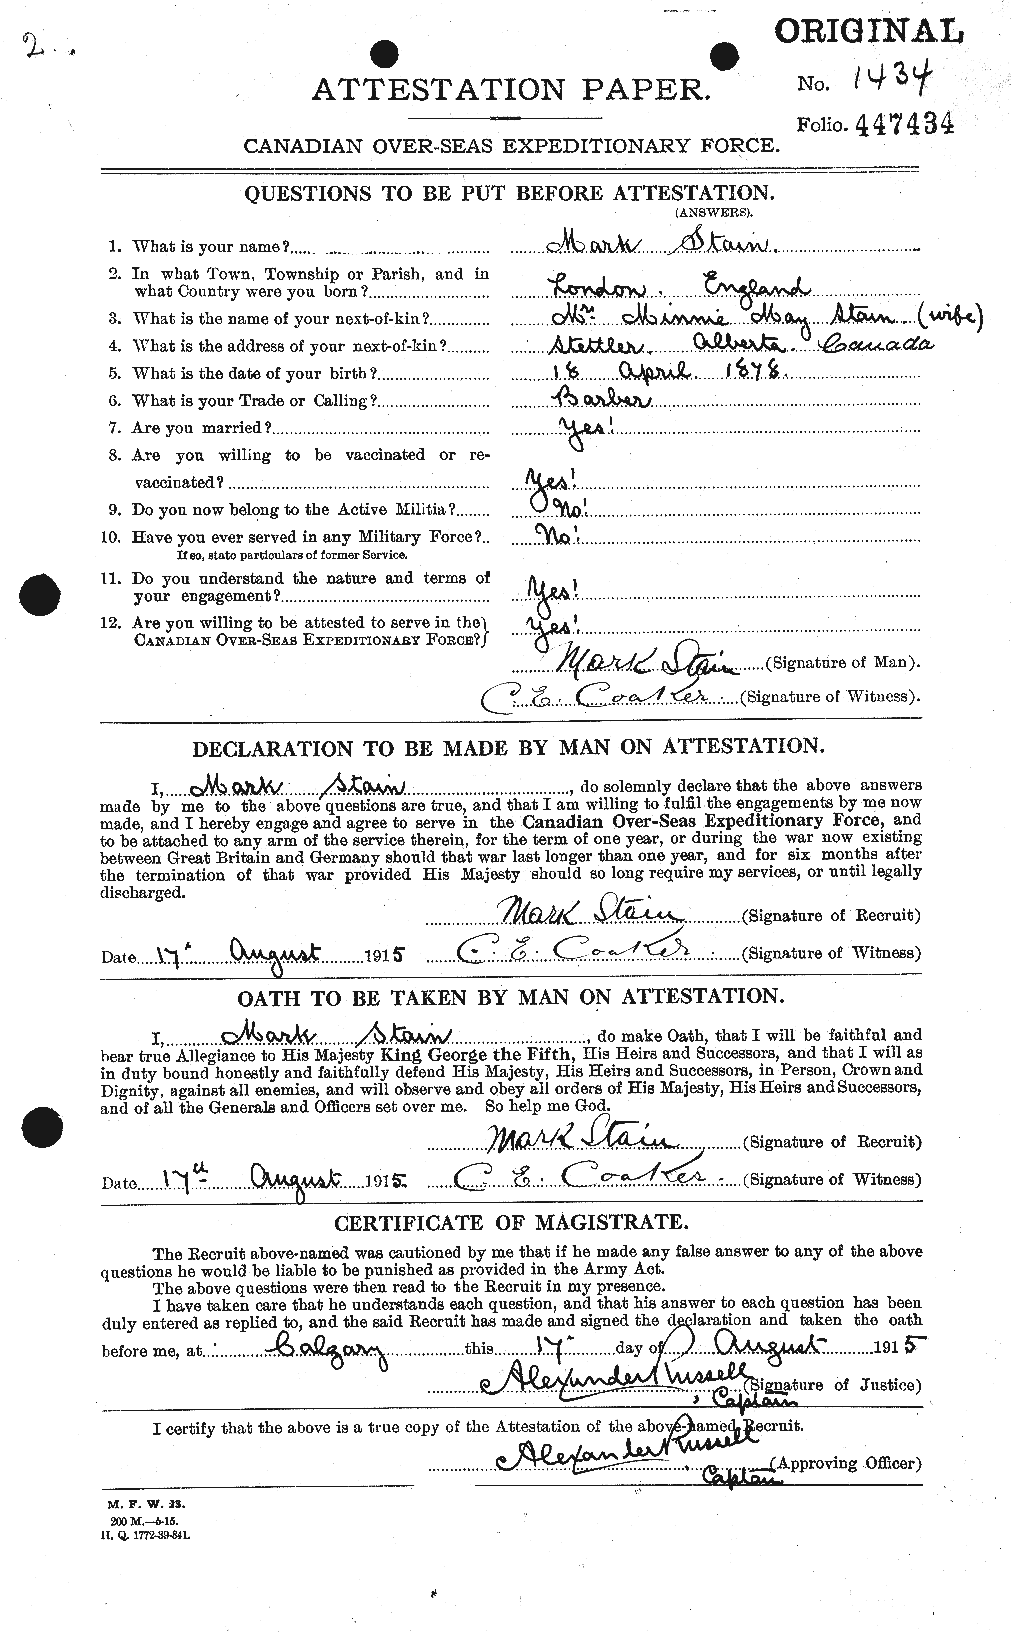 Personnel Records of the First World War - CEF 117291a